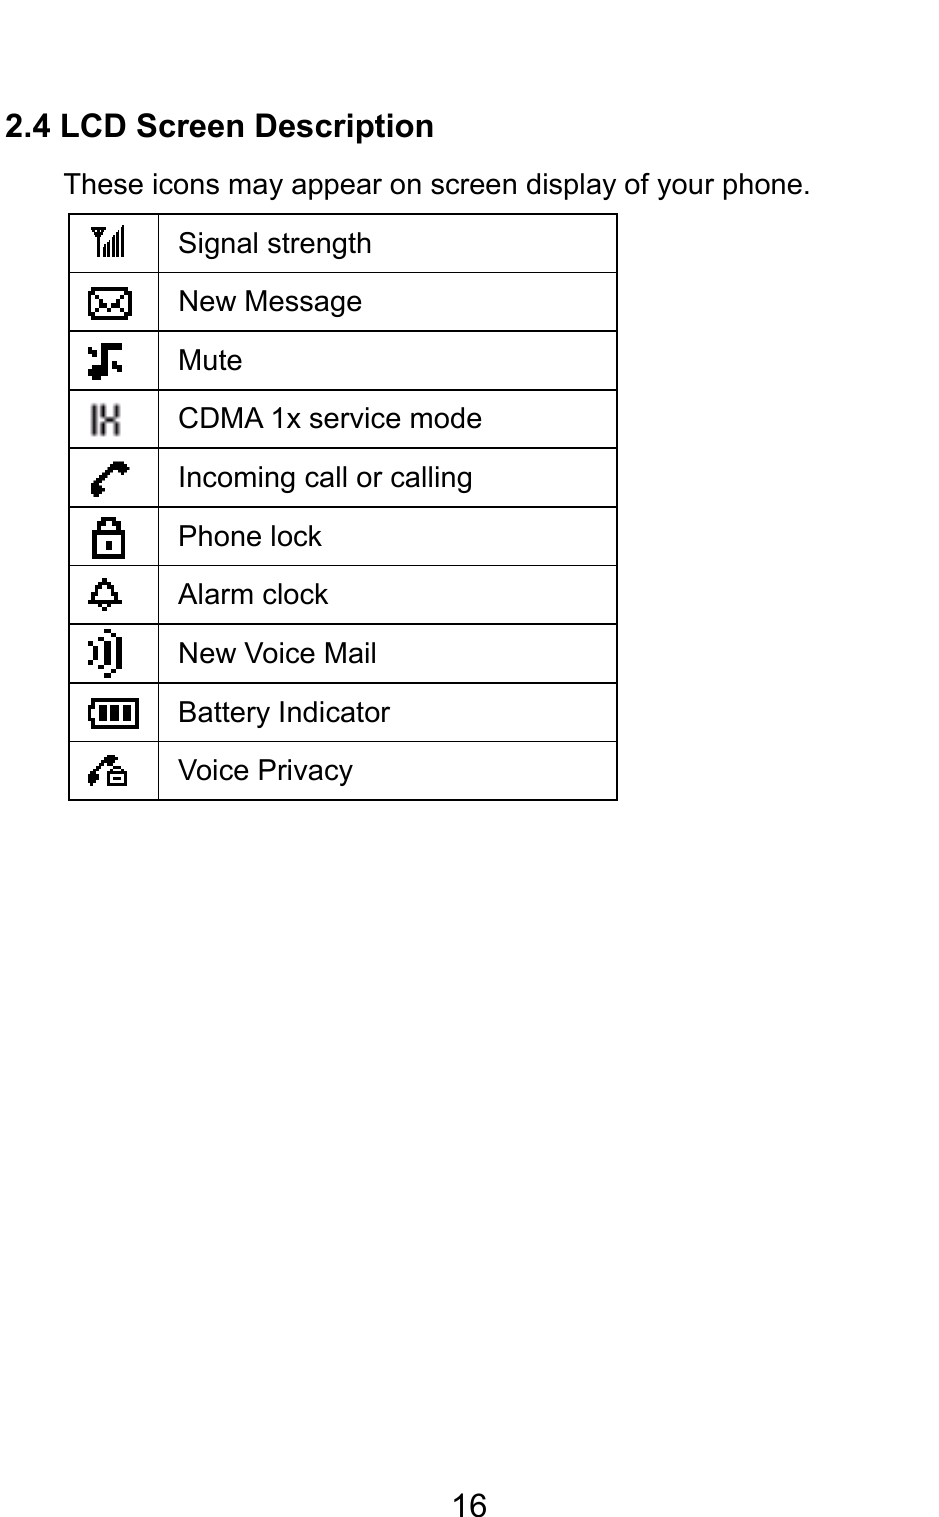                                     162.4 LCD Screen Description These icons may appear on screen display of your phone.  Signal strength  New Message  Mute  CDMA 1x service mode  Incoming call or calling  Phone lock  Alarm clock  New Voice Mail  Battery Indicator  Voice Privacy  